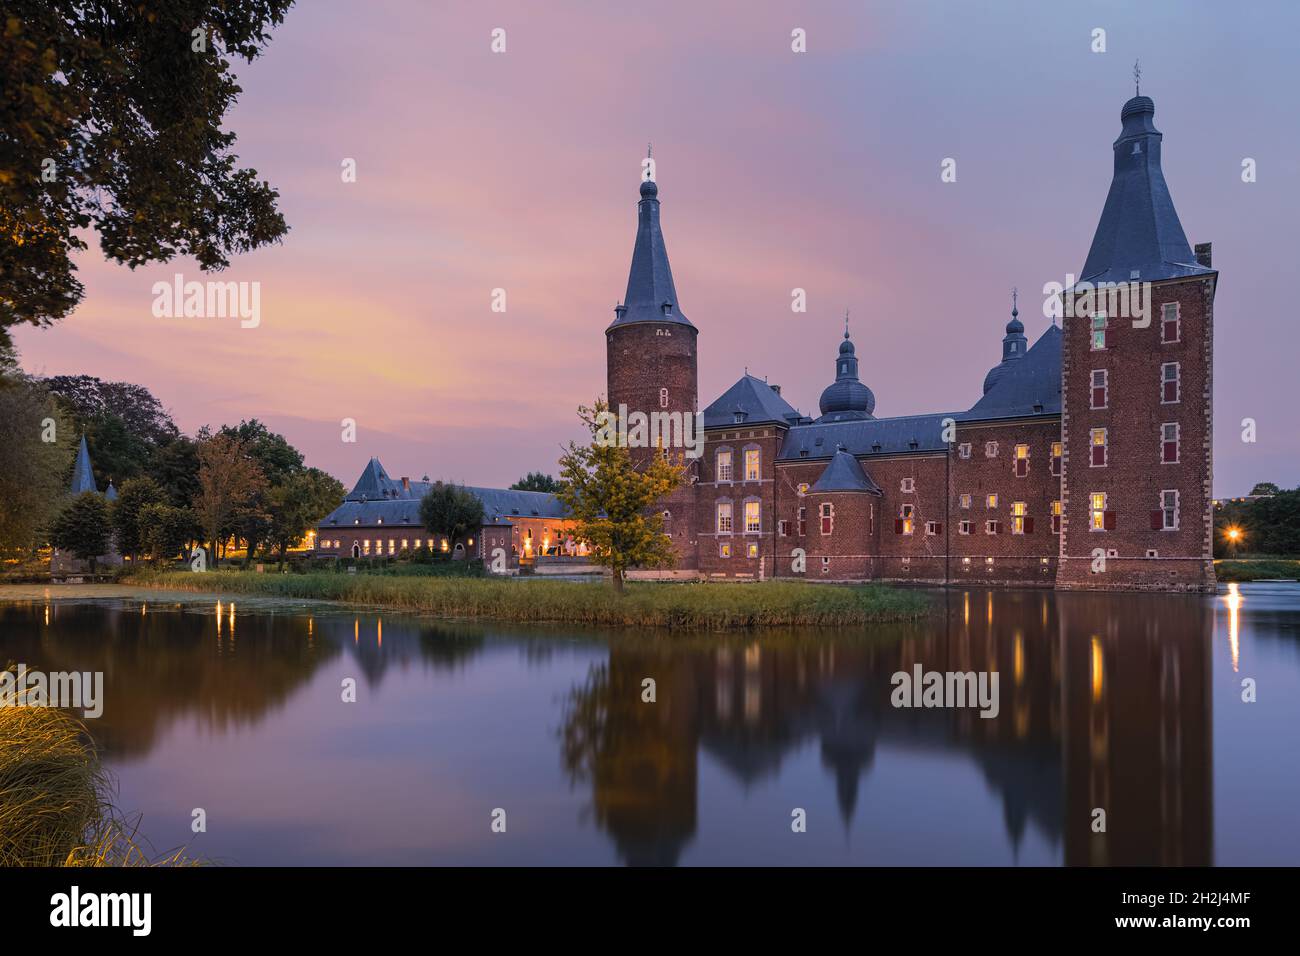 Hoensbroek Castle is one of the largest castles in the Netherlands. It is situated in Hoensbroek, a town in the province of Limburg. This imposing wat Stock Photo